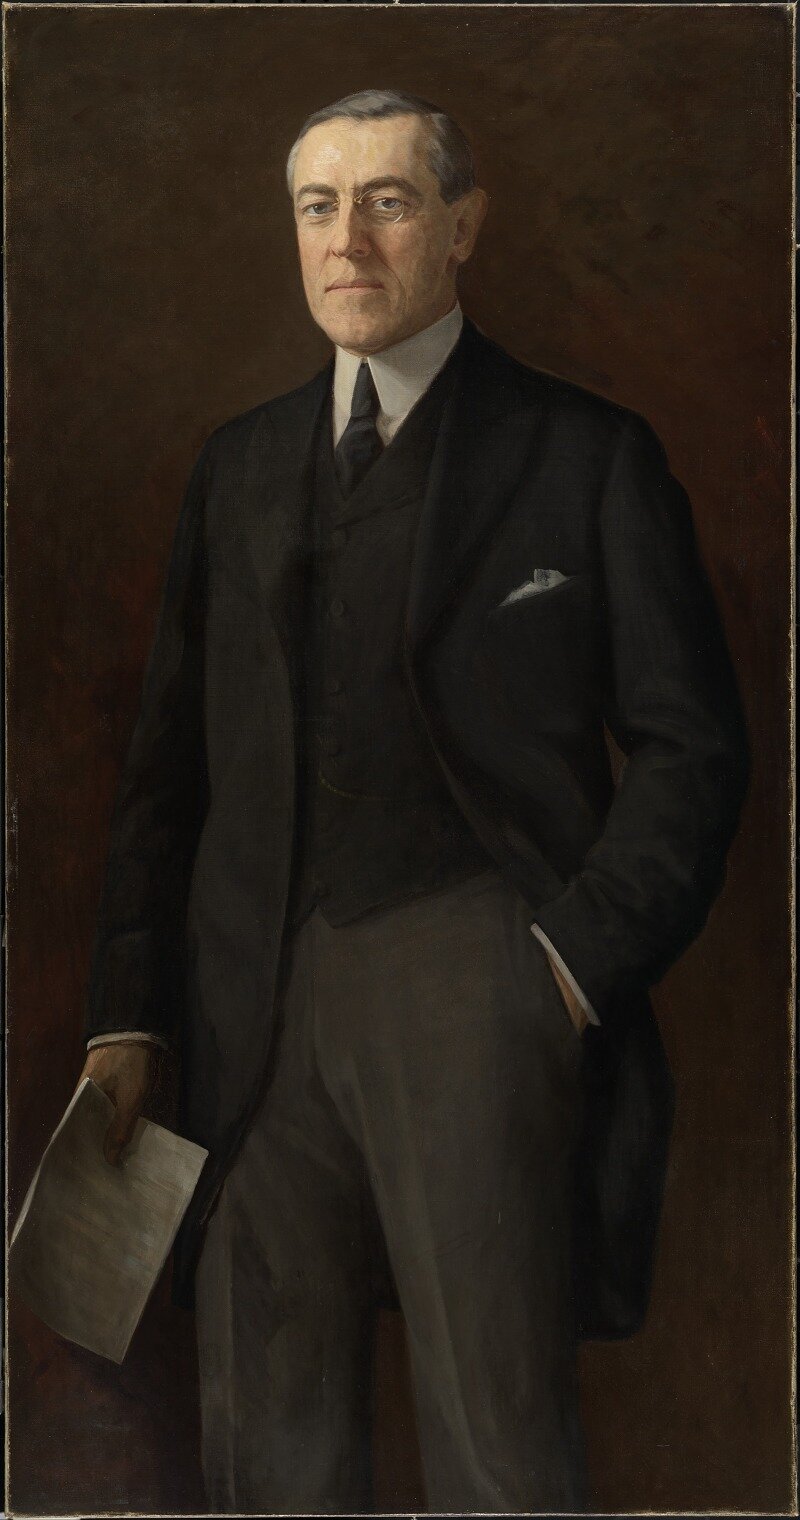 Woodrow Wilson at the National Portrait Gallery  